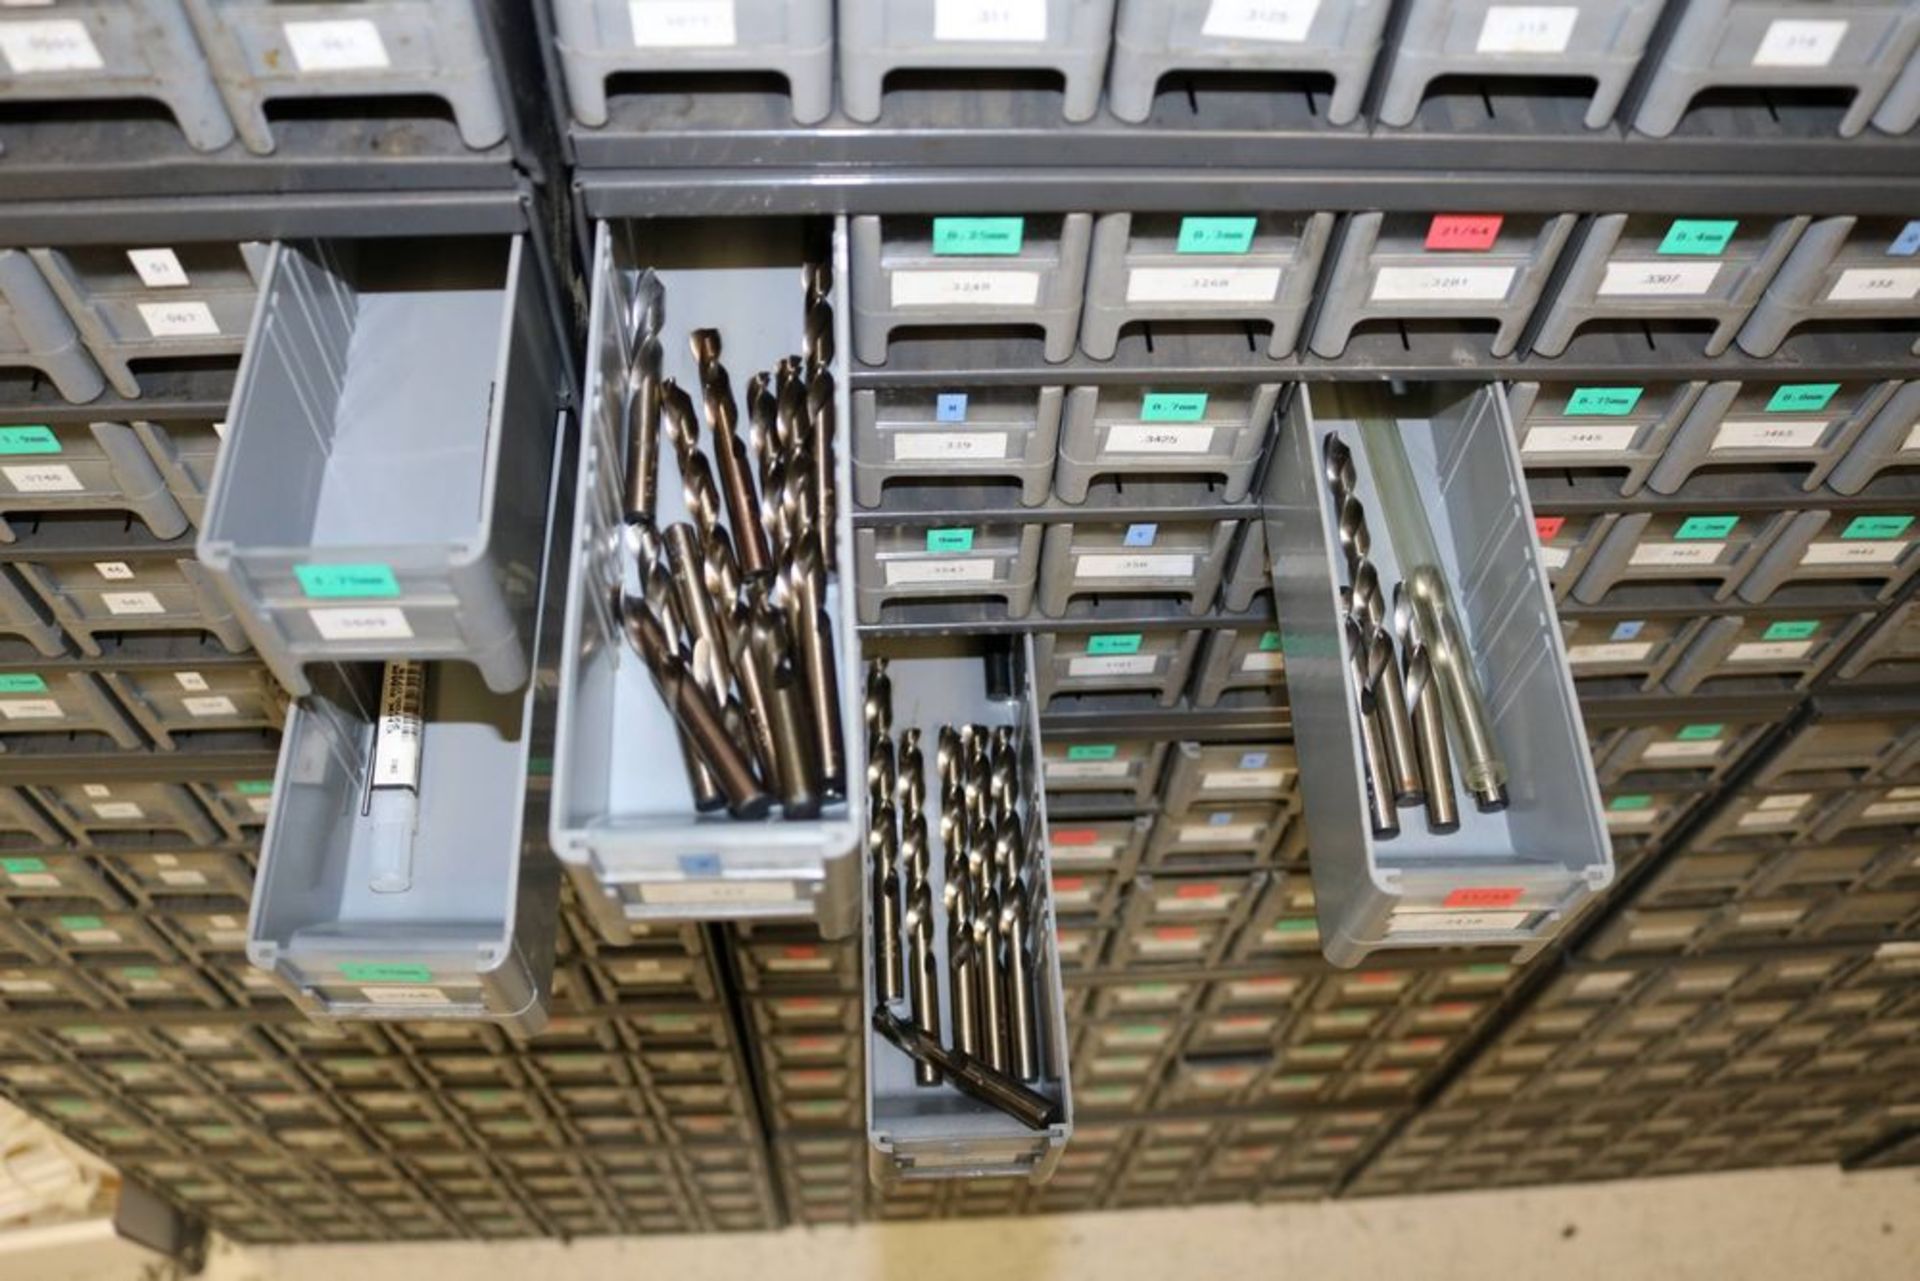 Tool Organizers 336 Drawer Capacity, Includes Many Various Size Drills. - Image 5 of 6